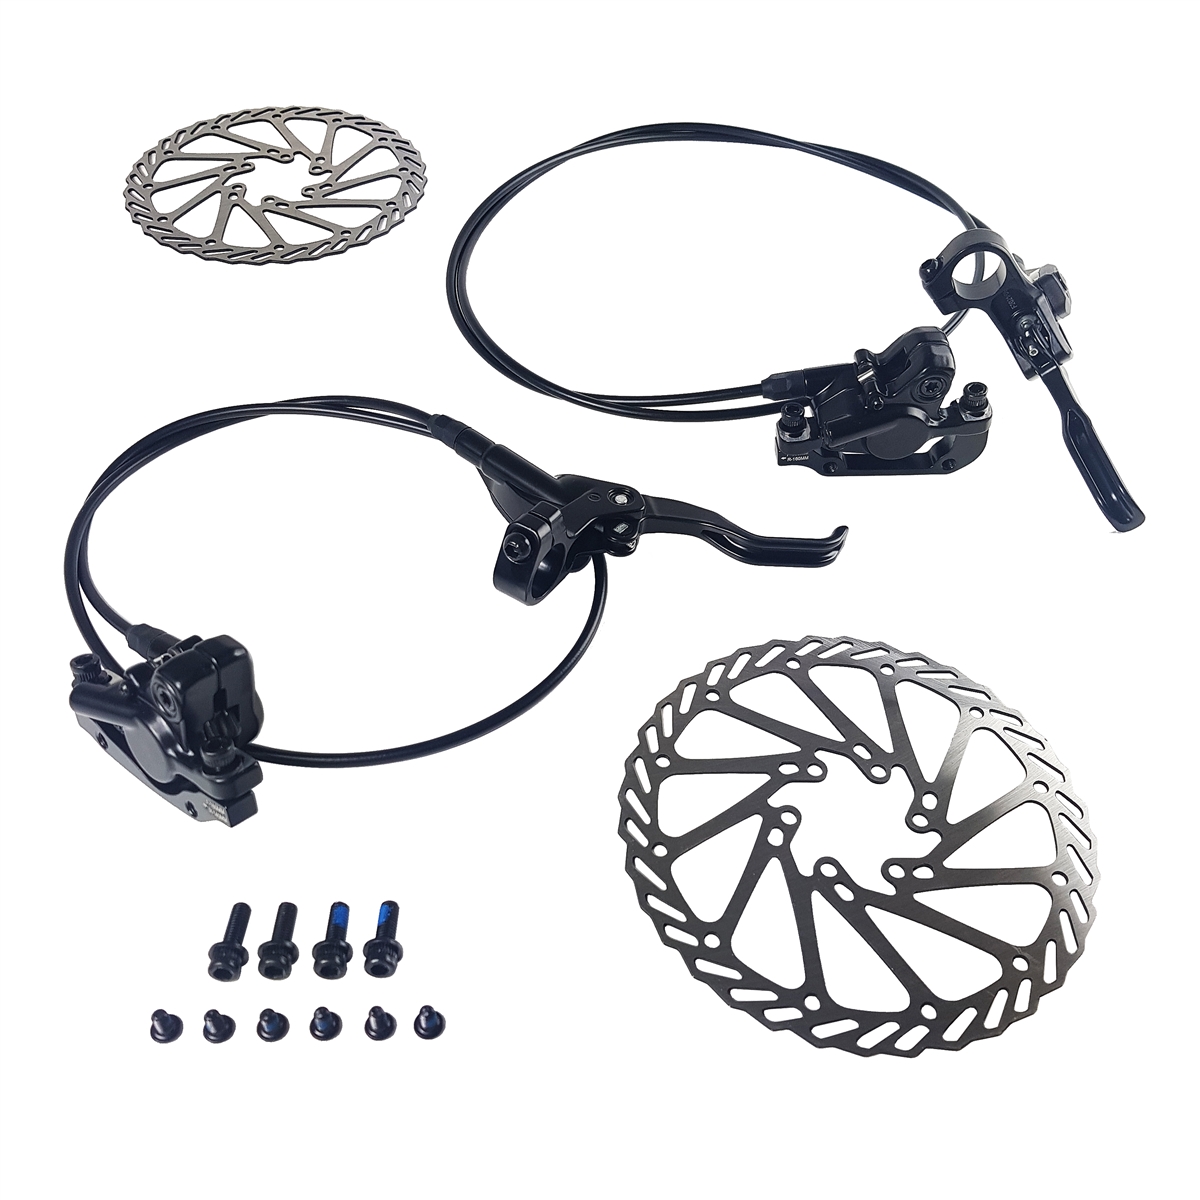 TD-8714 Front / Rear Hydraulic Disc Brakes Set with 160mm Discs